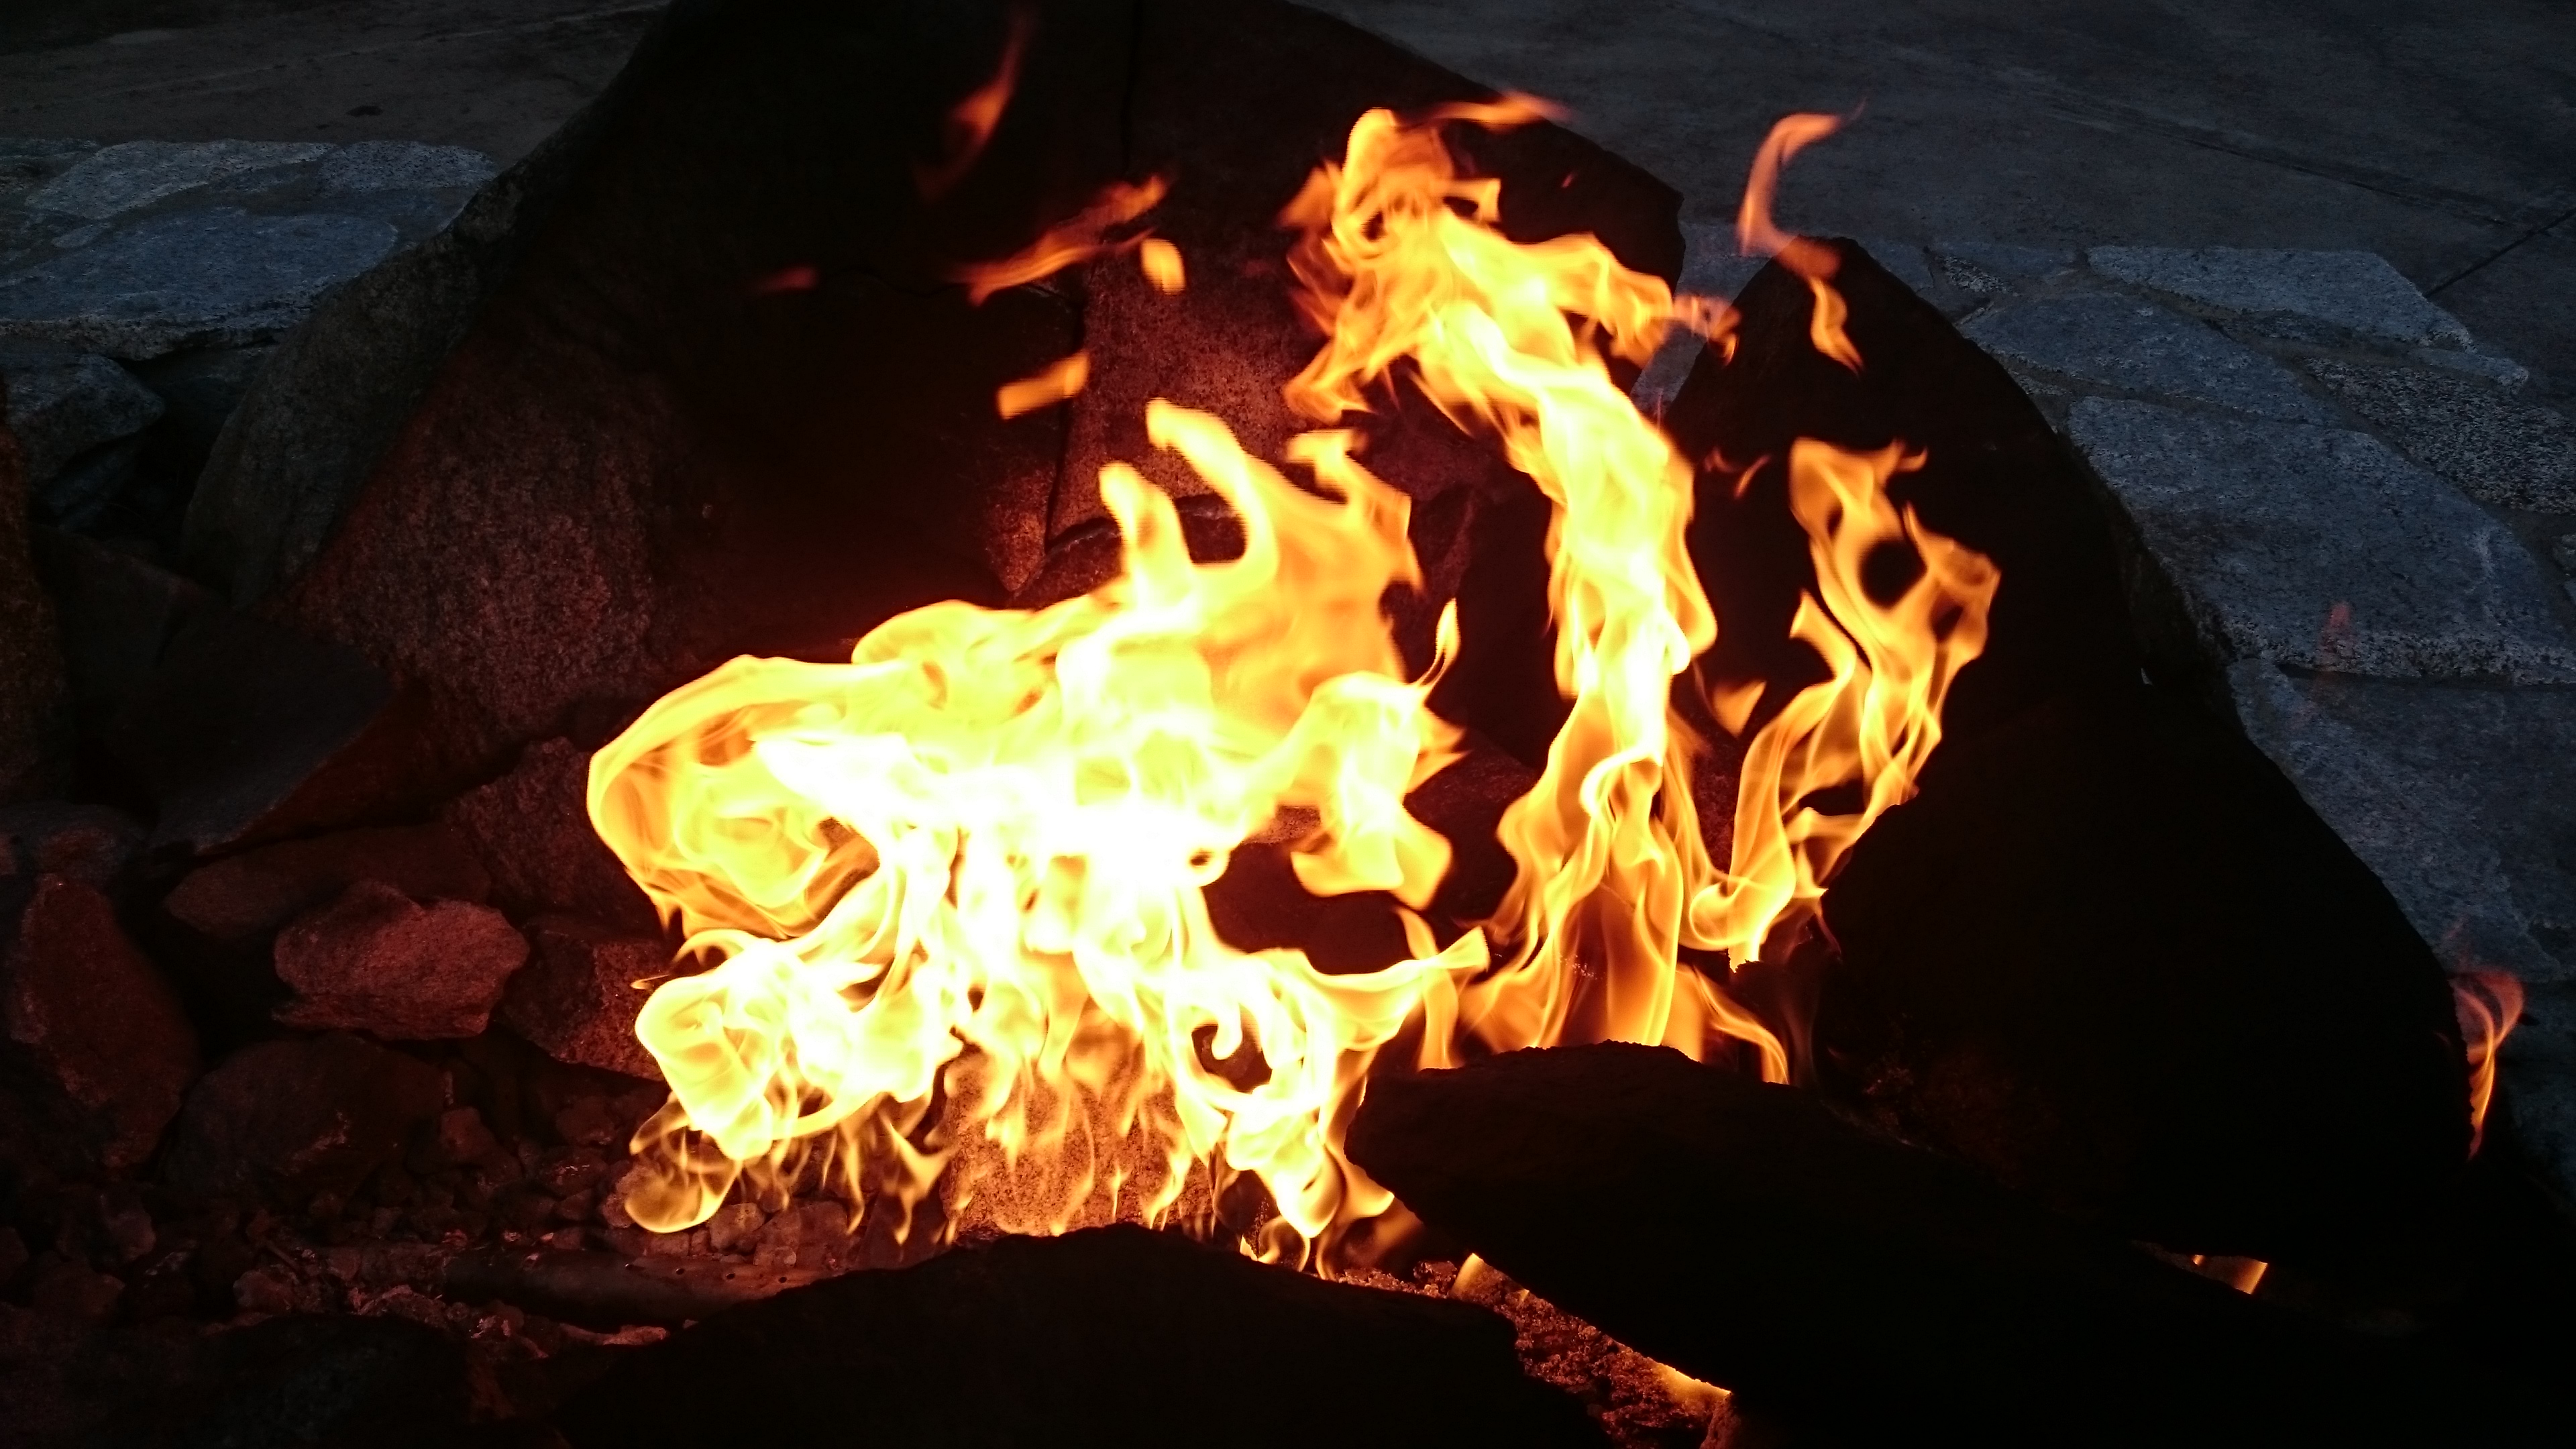 _images/Fire-tahoe-firepit-by-Tim.jpg